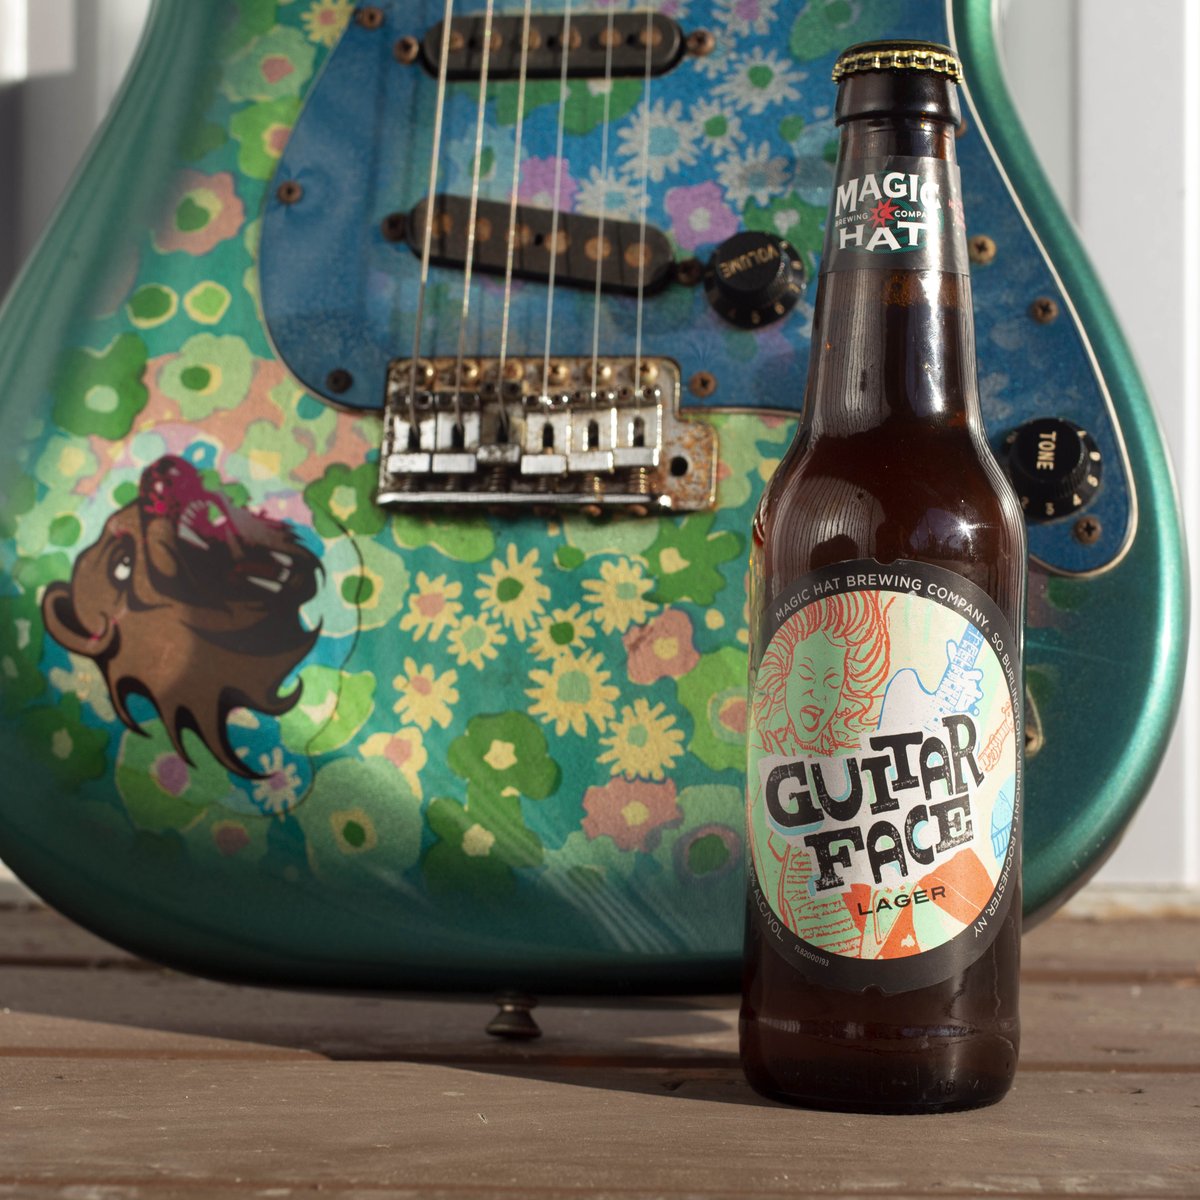 We've been crushing this hoppy lager since it came off the line. It starts off with mild spice notes and then moves straight into a tasty citrus lick. Shut your eyes, hit it hard and show us your #GuitarFace!